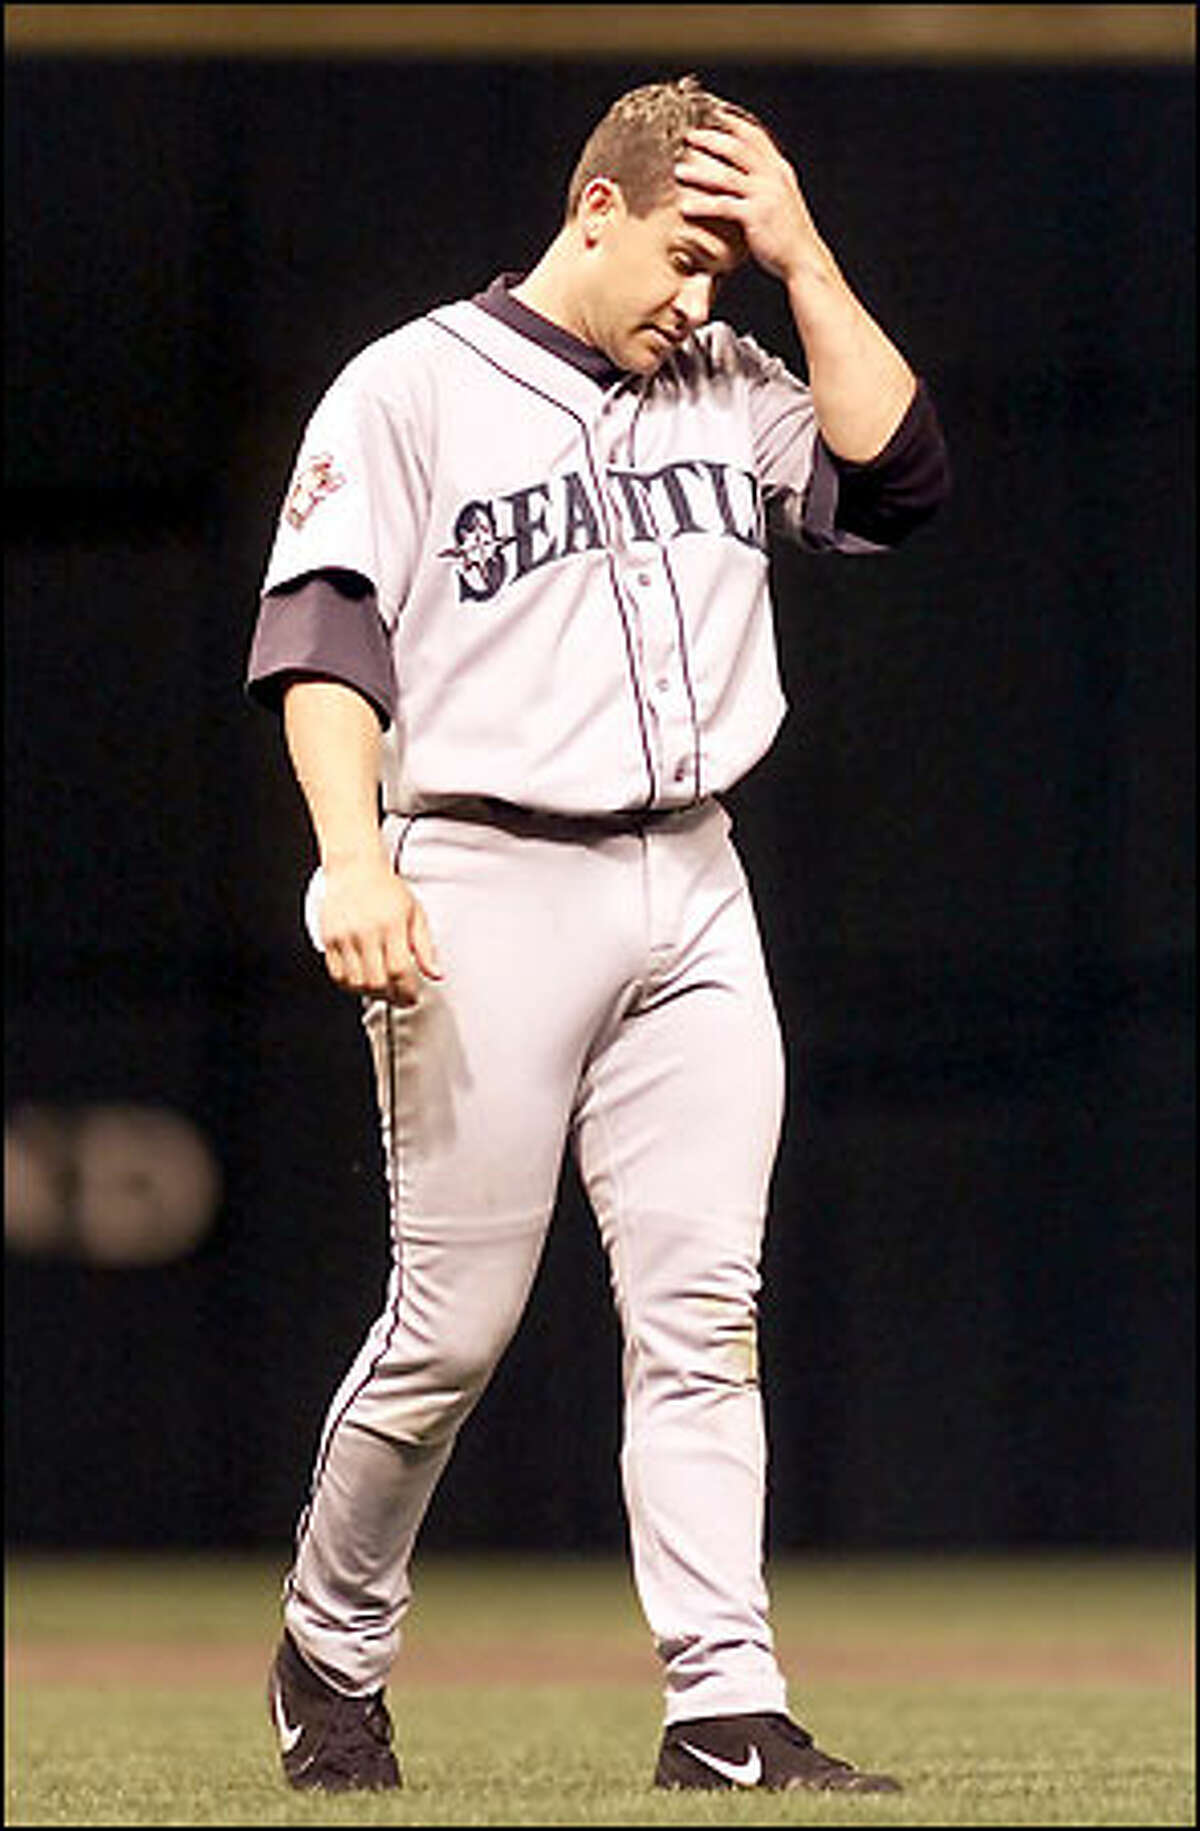 Bret Boone, who struck out swinging four times in his five at-bats, walks back to his position on the field after ending an inning.